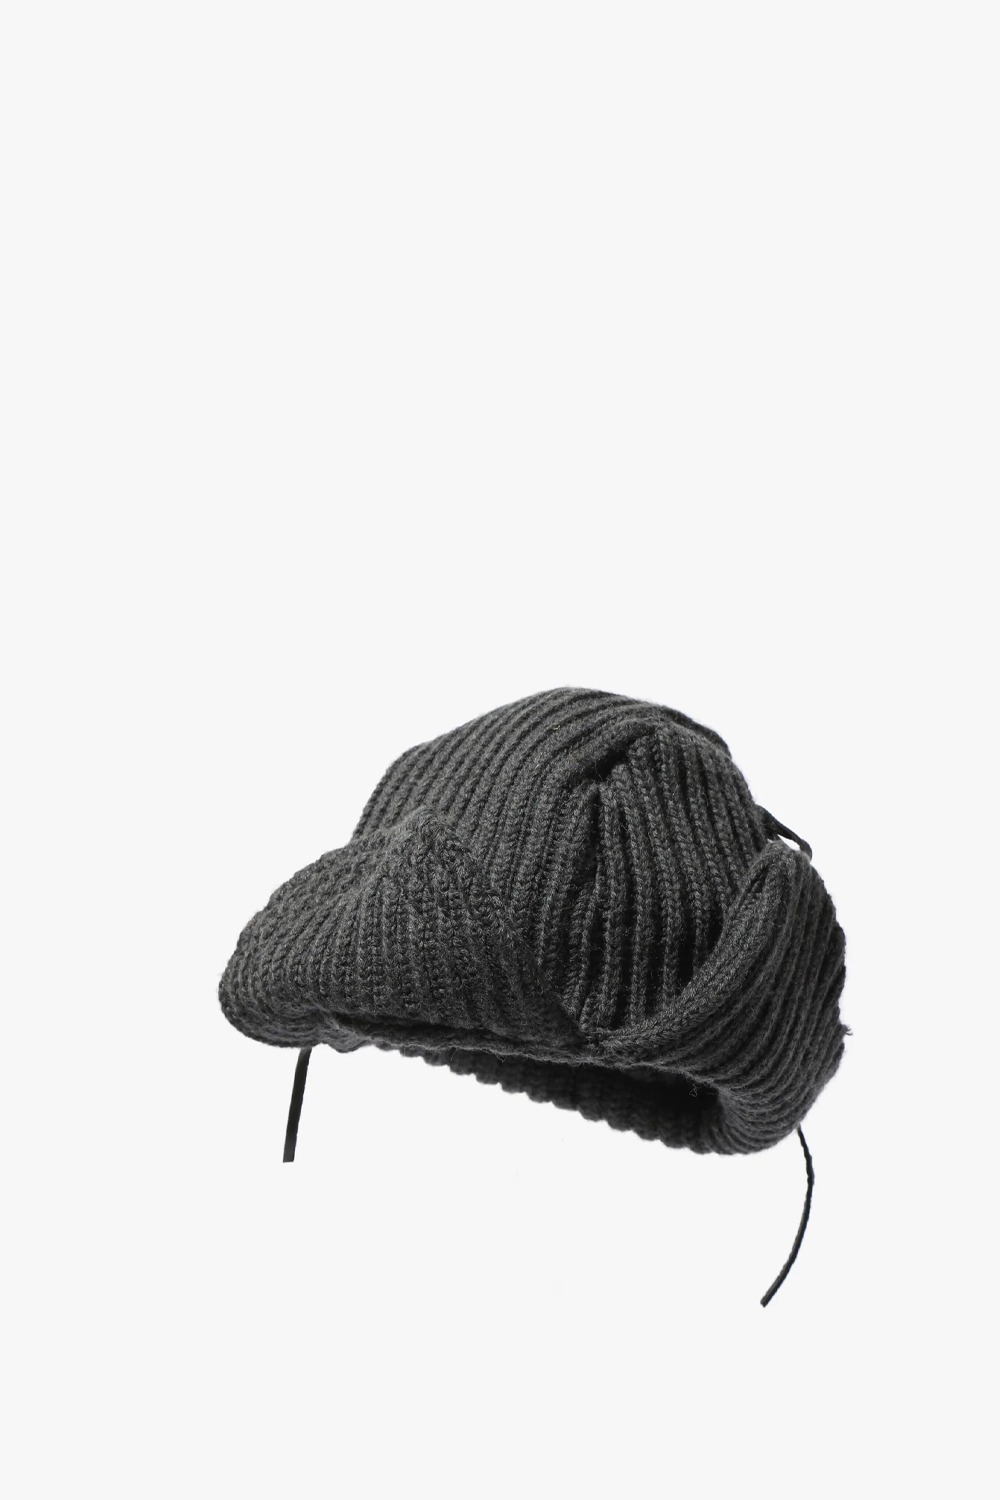 SOUTH2 WEST8 BOMBER CAP - W/A KNIT CHARCOAL